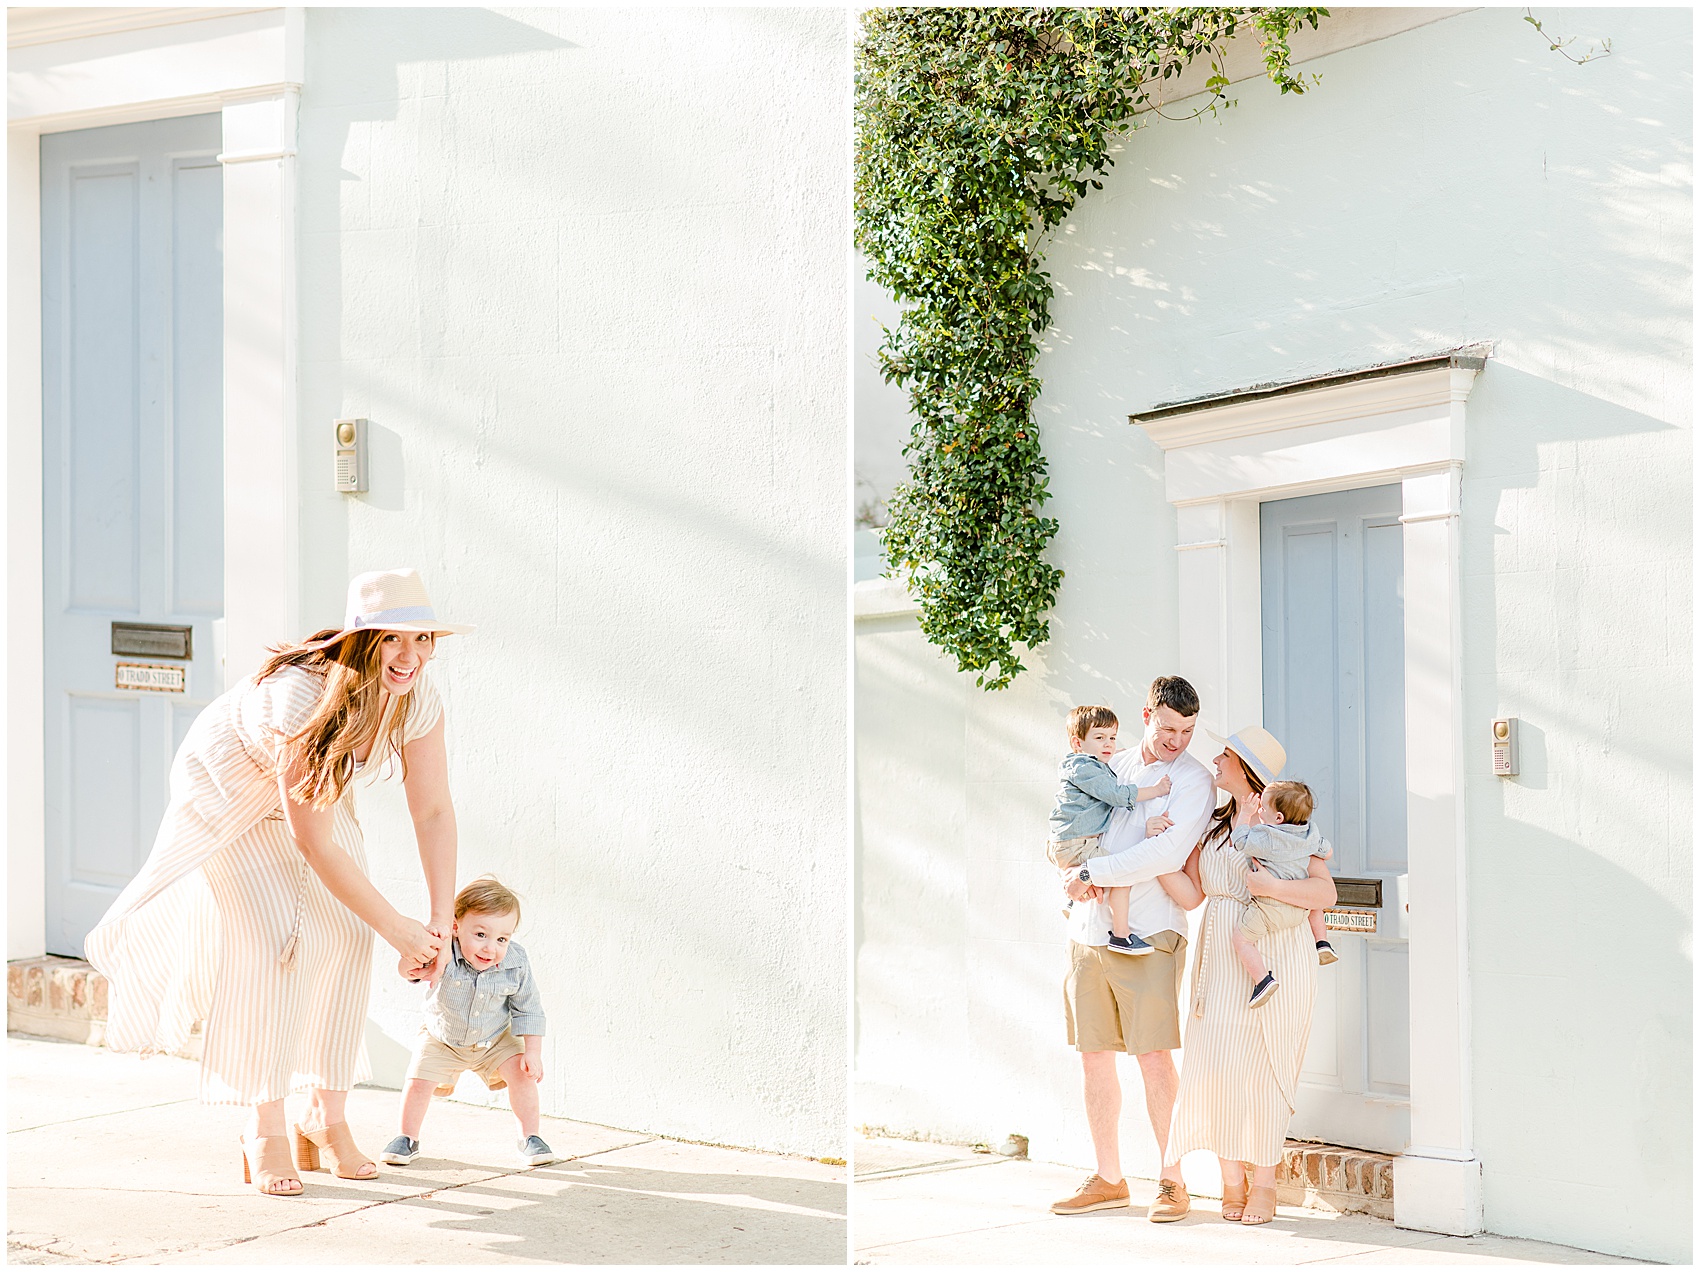 south of broad downtown Charlestion Folly Beach charleston wedding photographer session Lowcountry Charleston SC wedding Photographer_1988.jpg